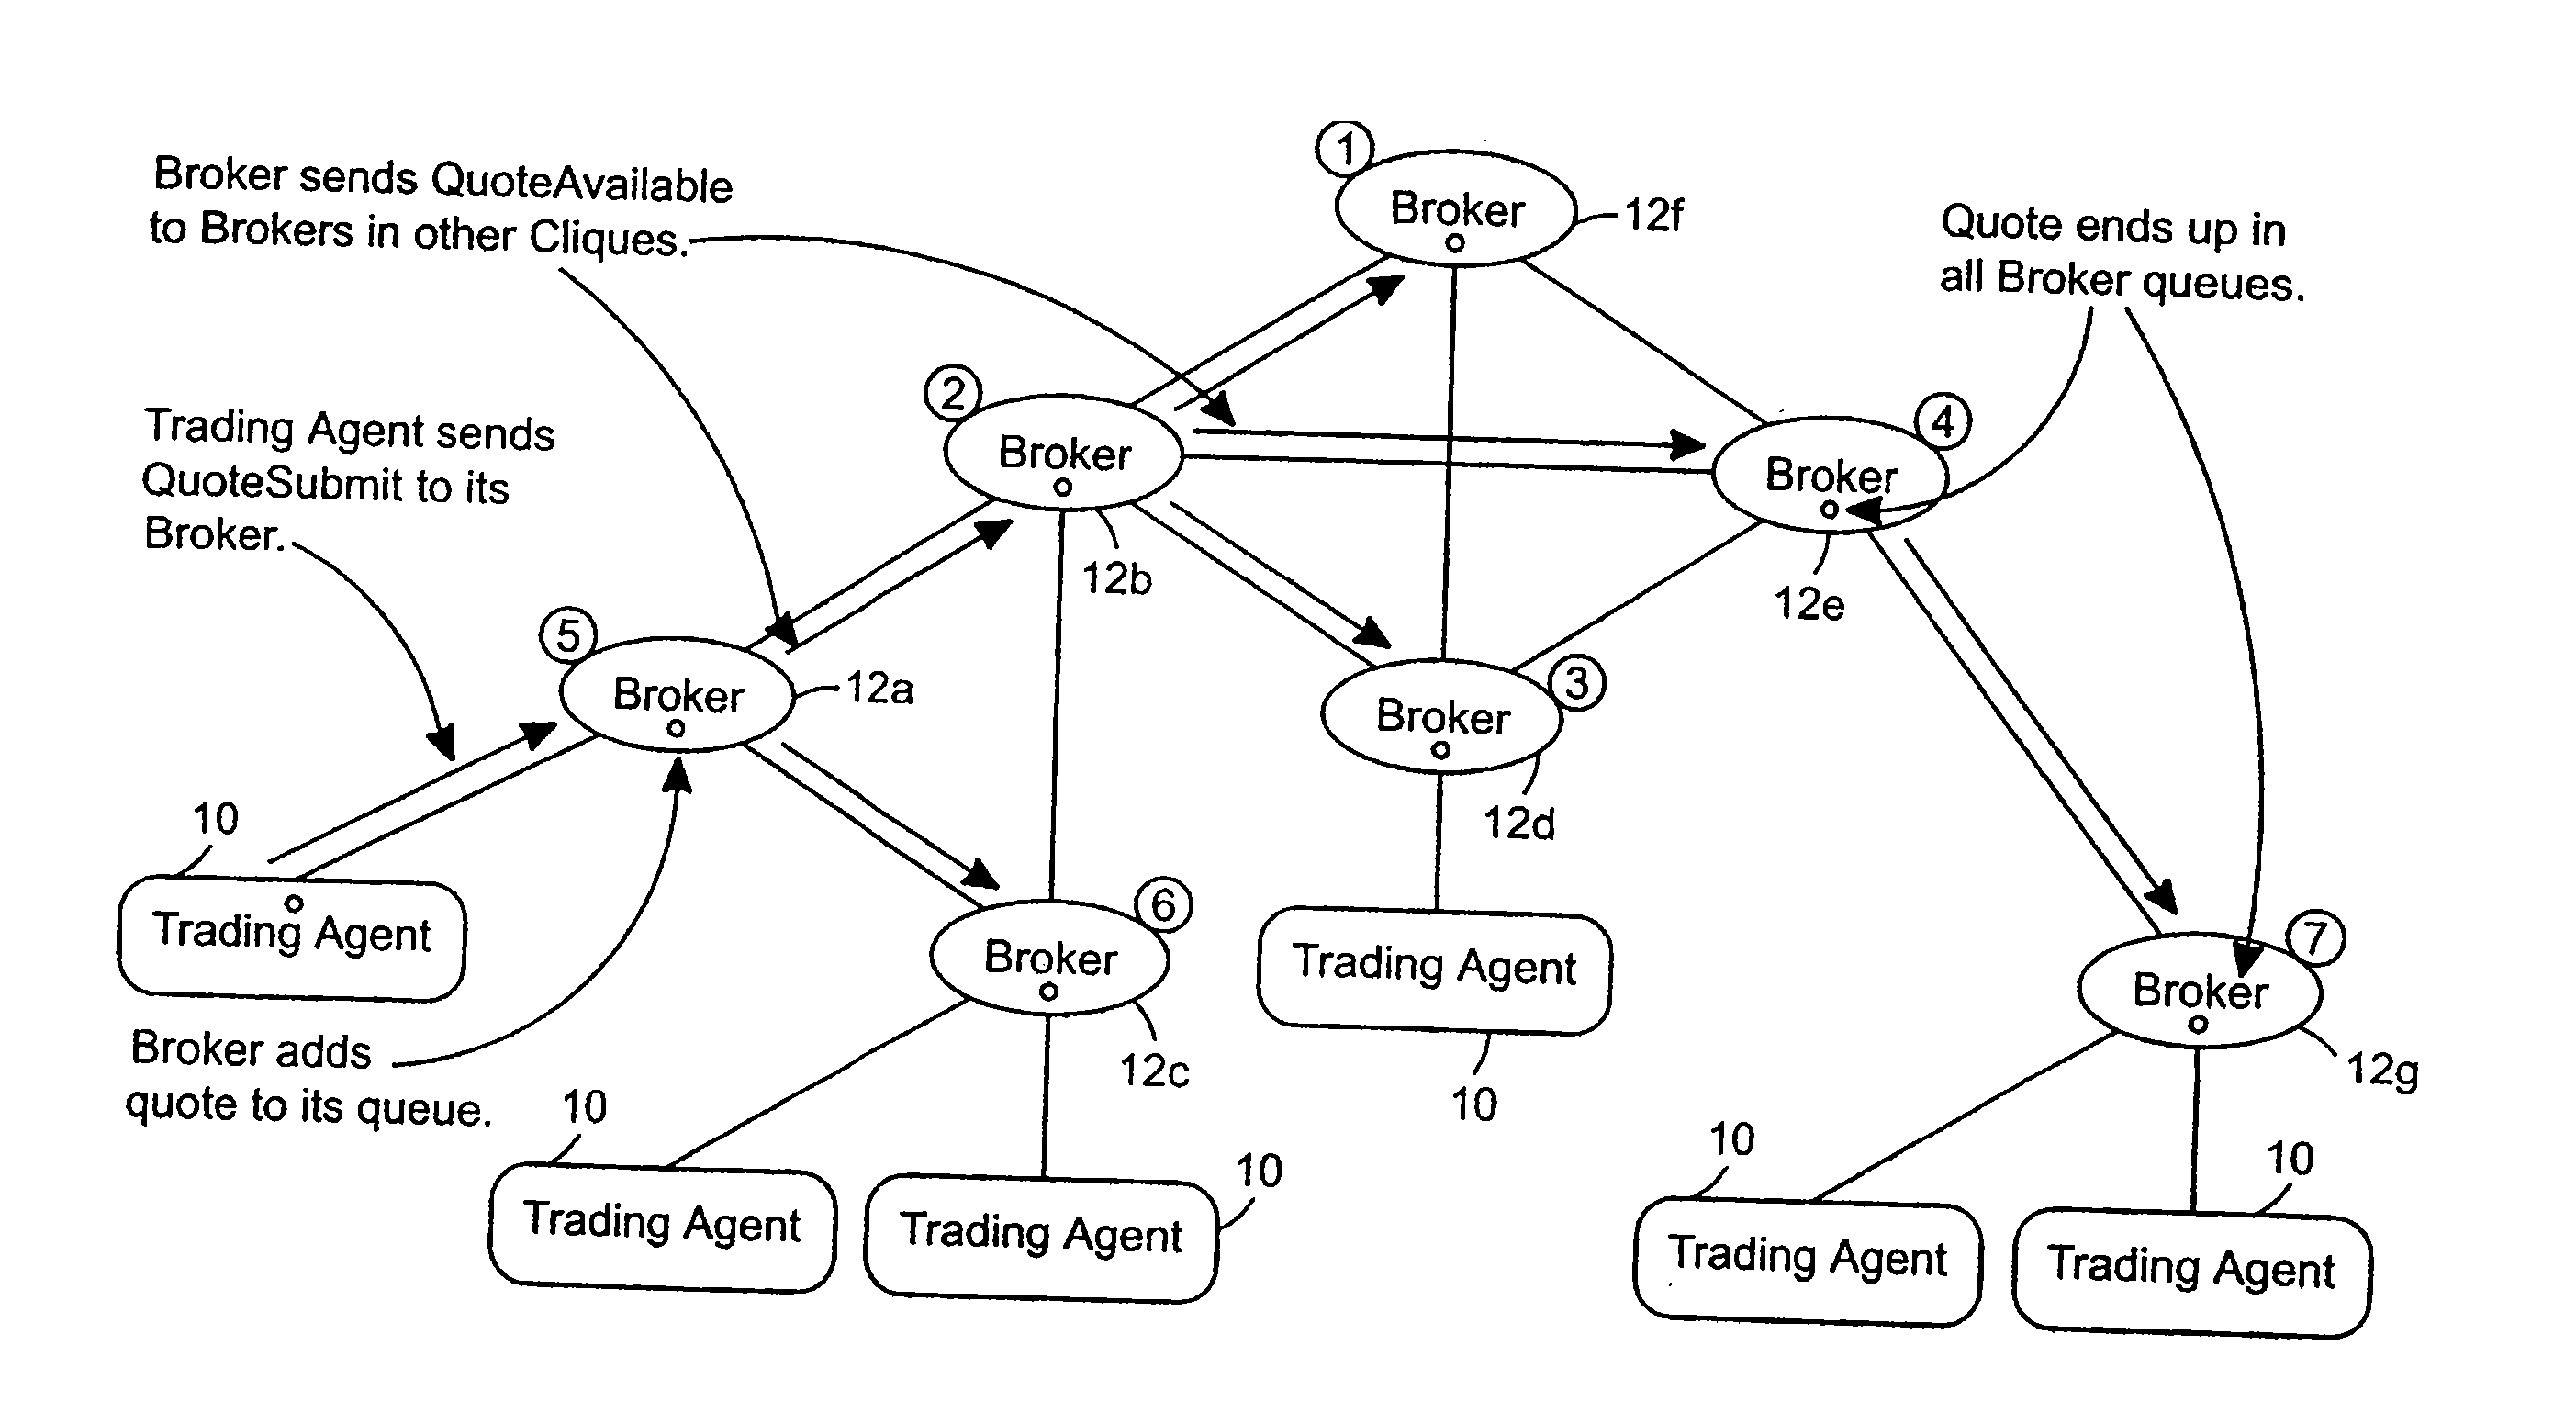 Compound order handling in an anonymous trading system